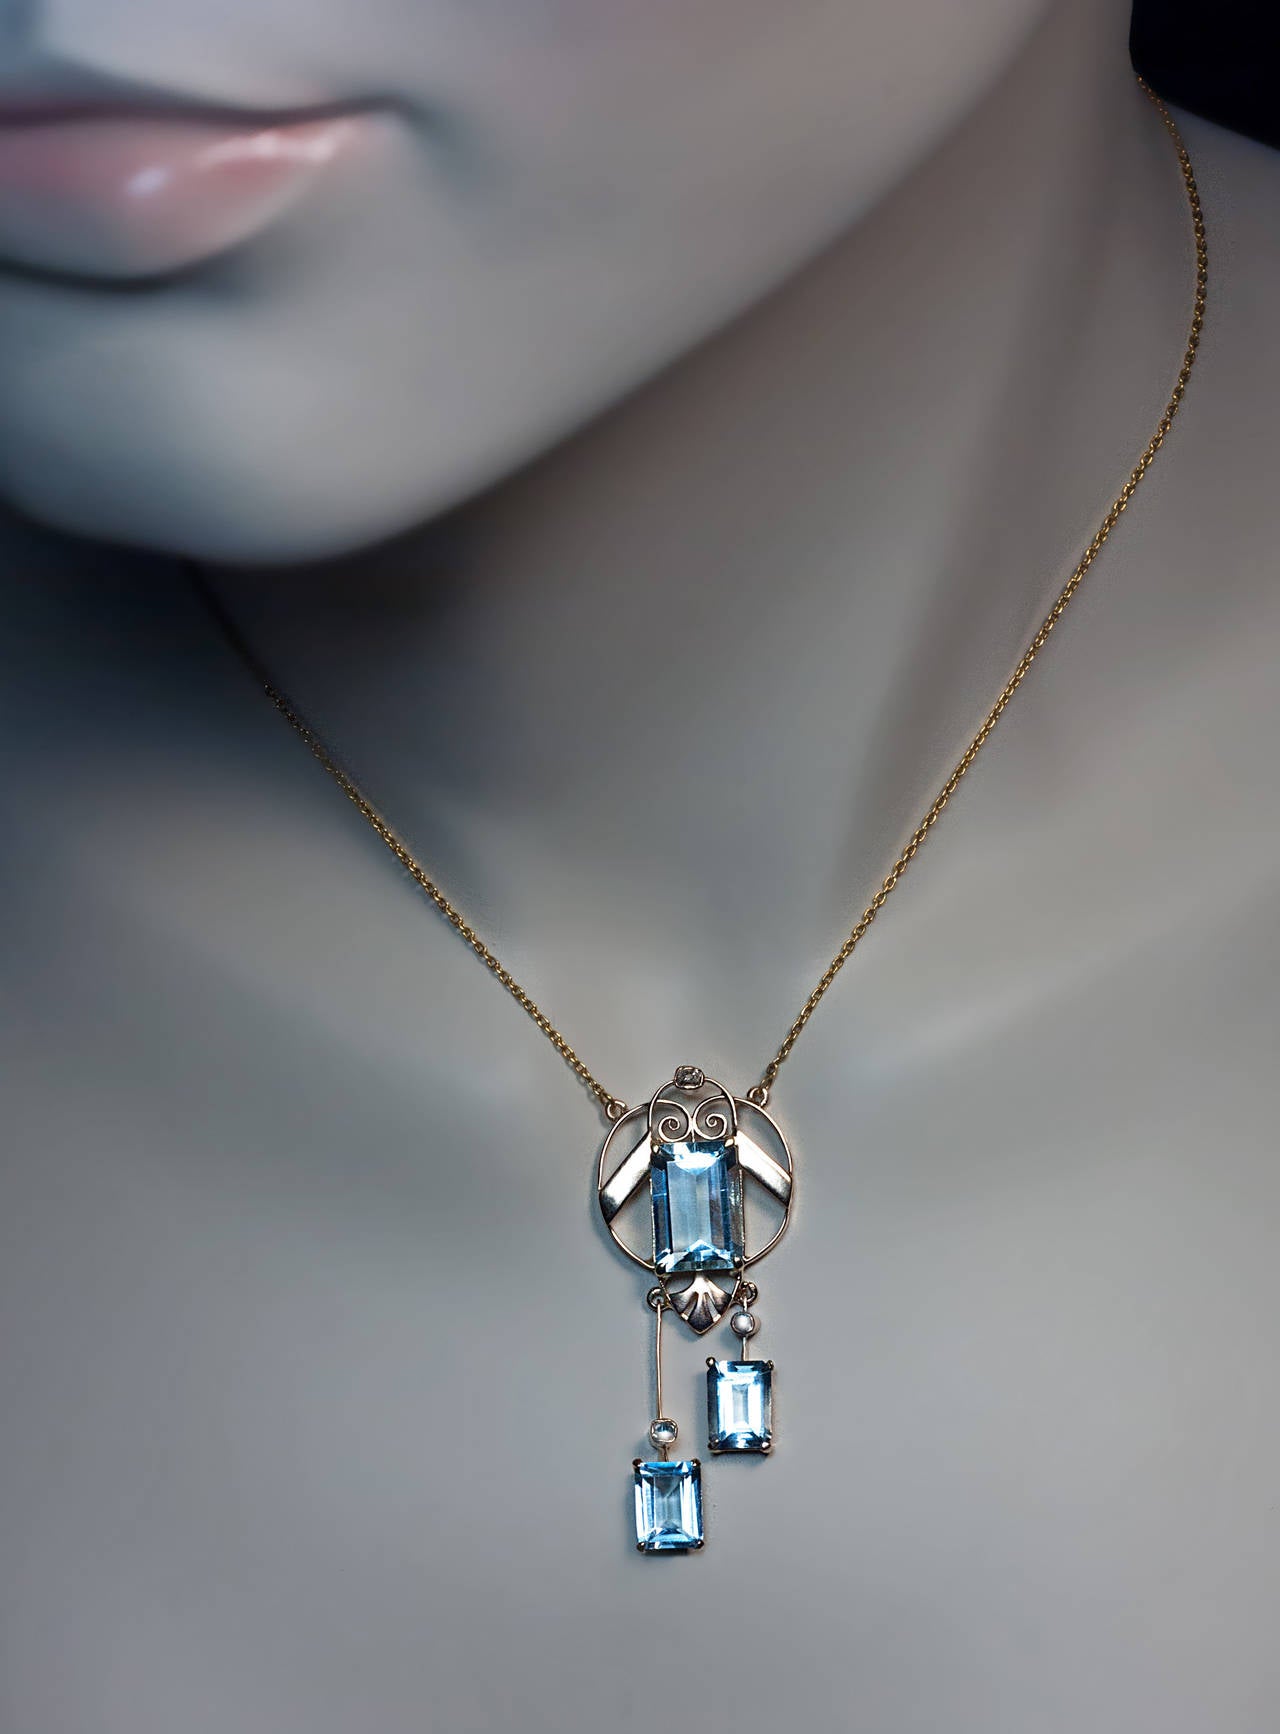 The 14K rose and yellow gold early Art Deco pendant necklace was made in Moscow between 1908 and 1917. 
The openwork negligee pendant features three emerald cut cool blue aquamarines.

Marked with 56 zolotnik gold standard and maker's